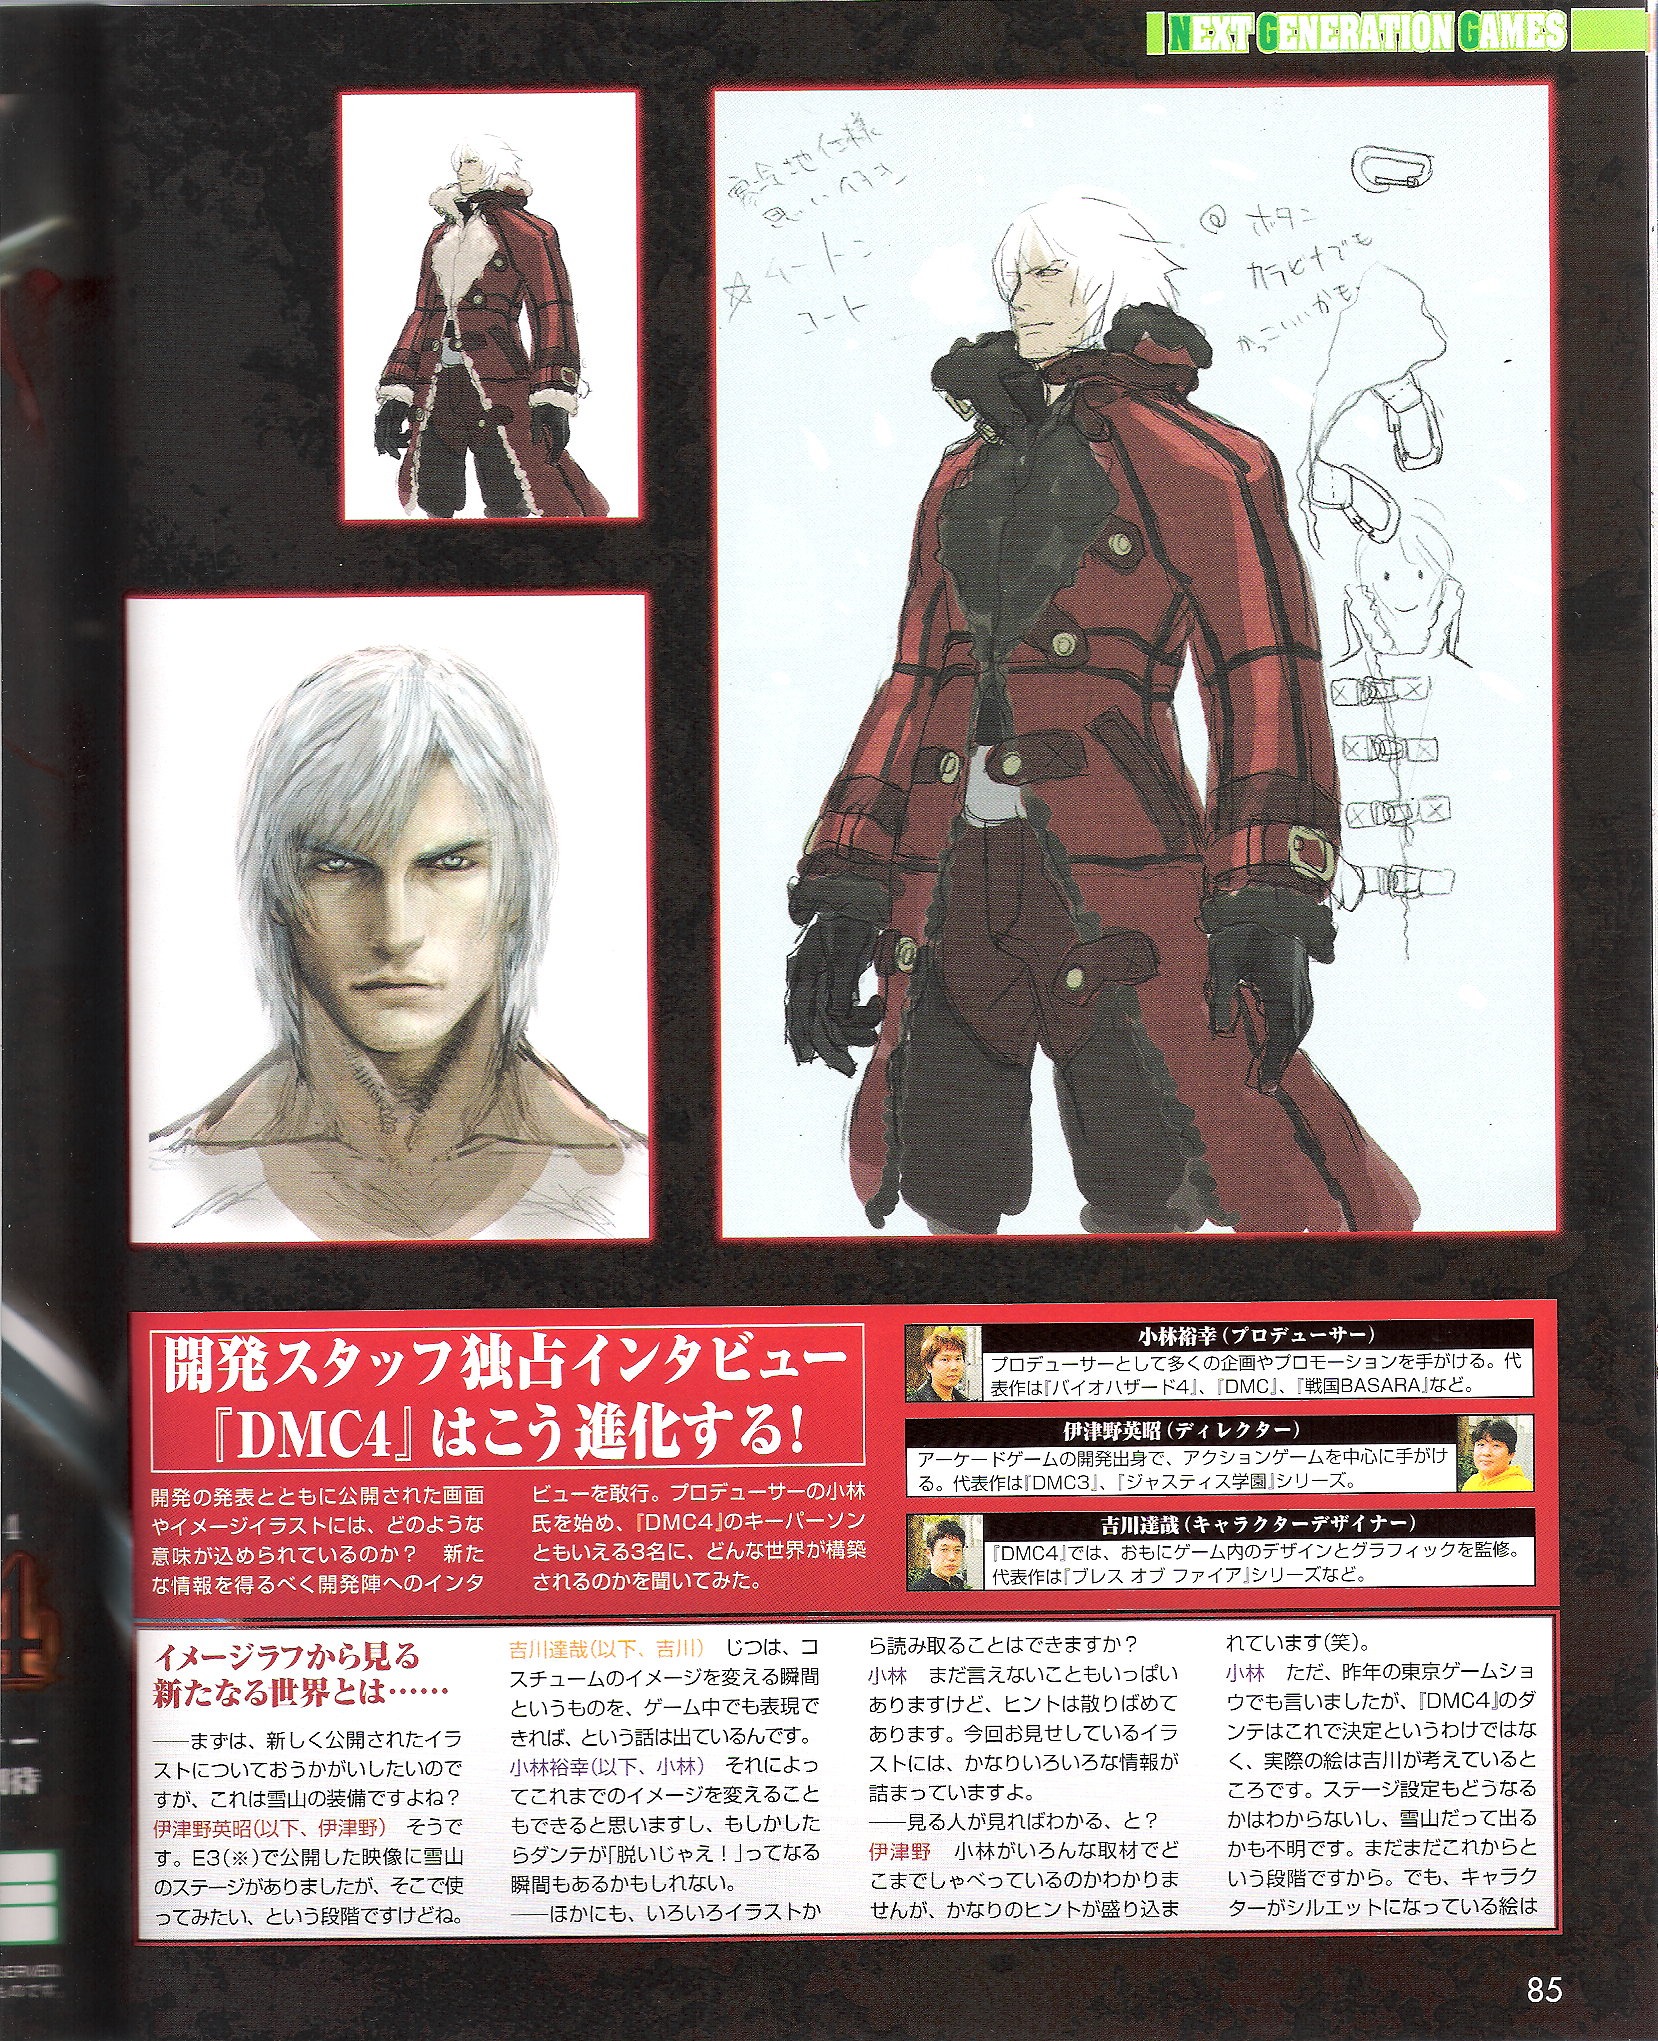 DMC2 wasn't the best game, but Dante's looks and face are the best in  series. Doesn't even look like it was made in 2002. : r/DevilMayCry